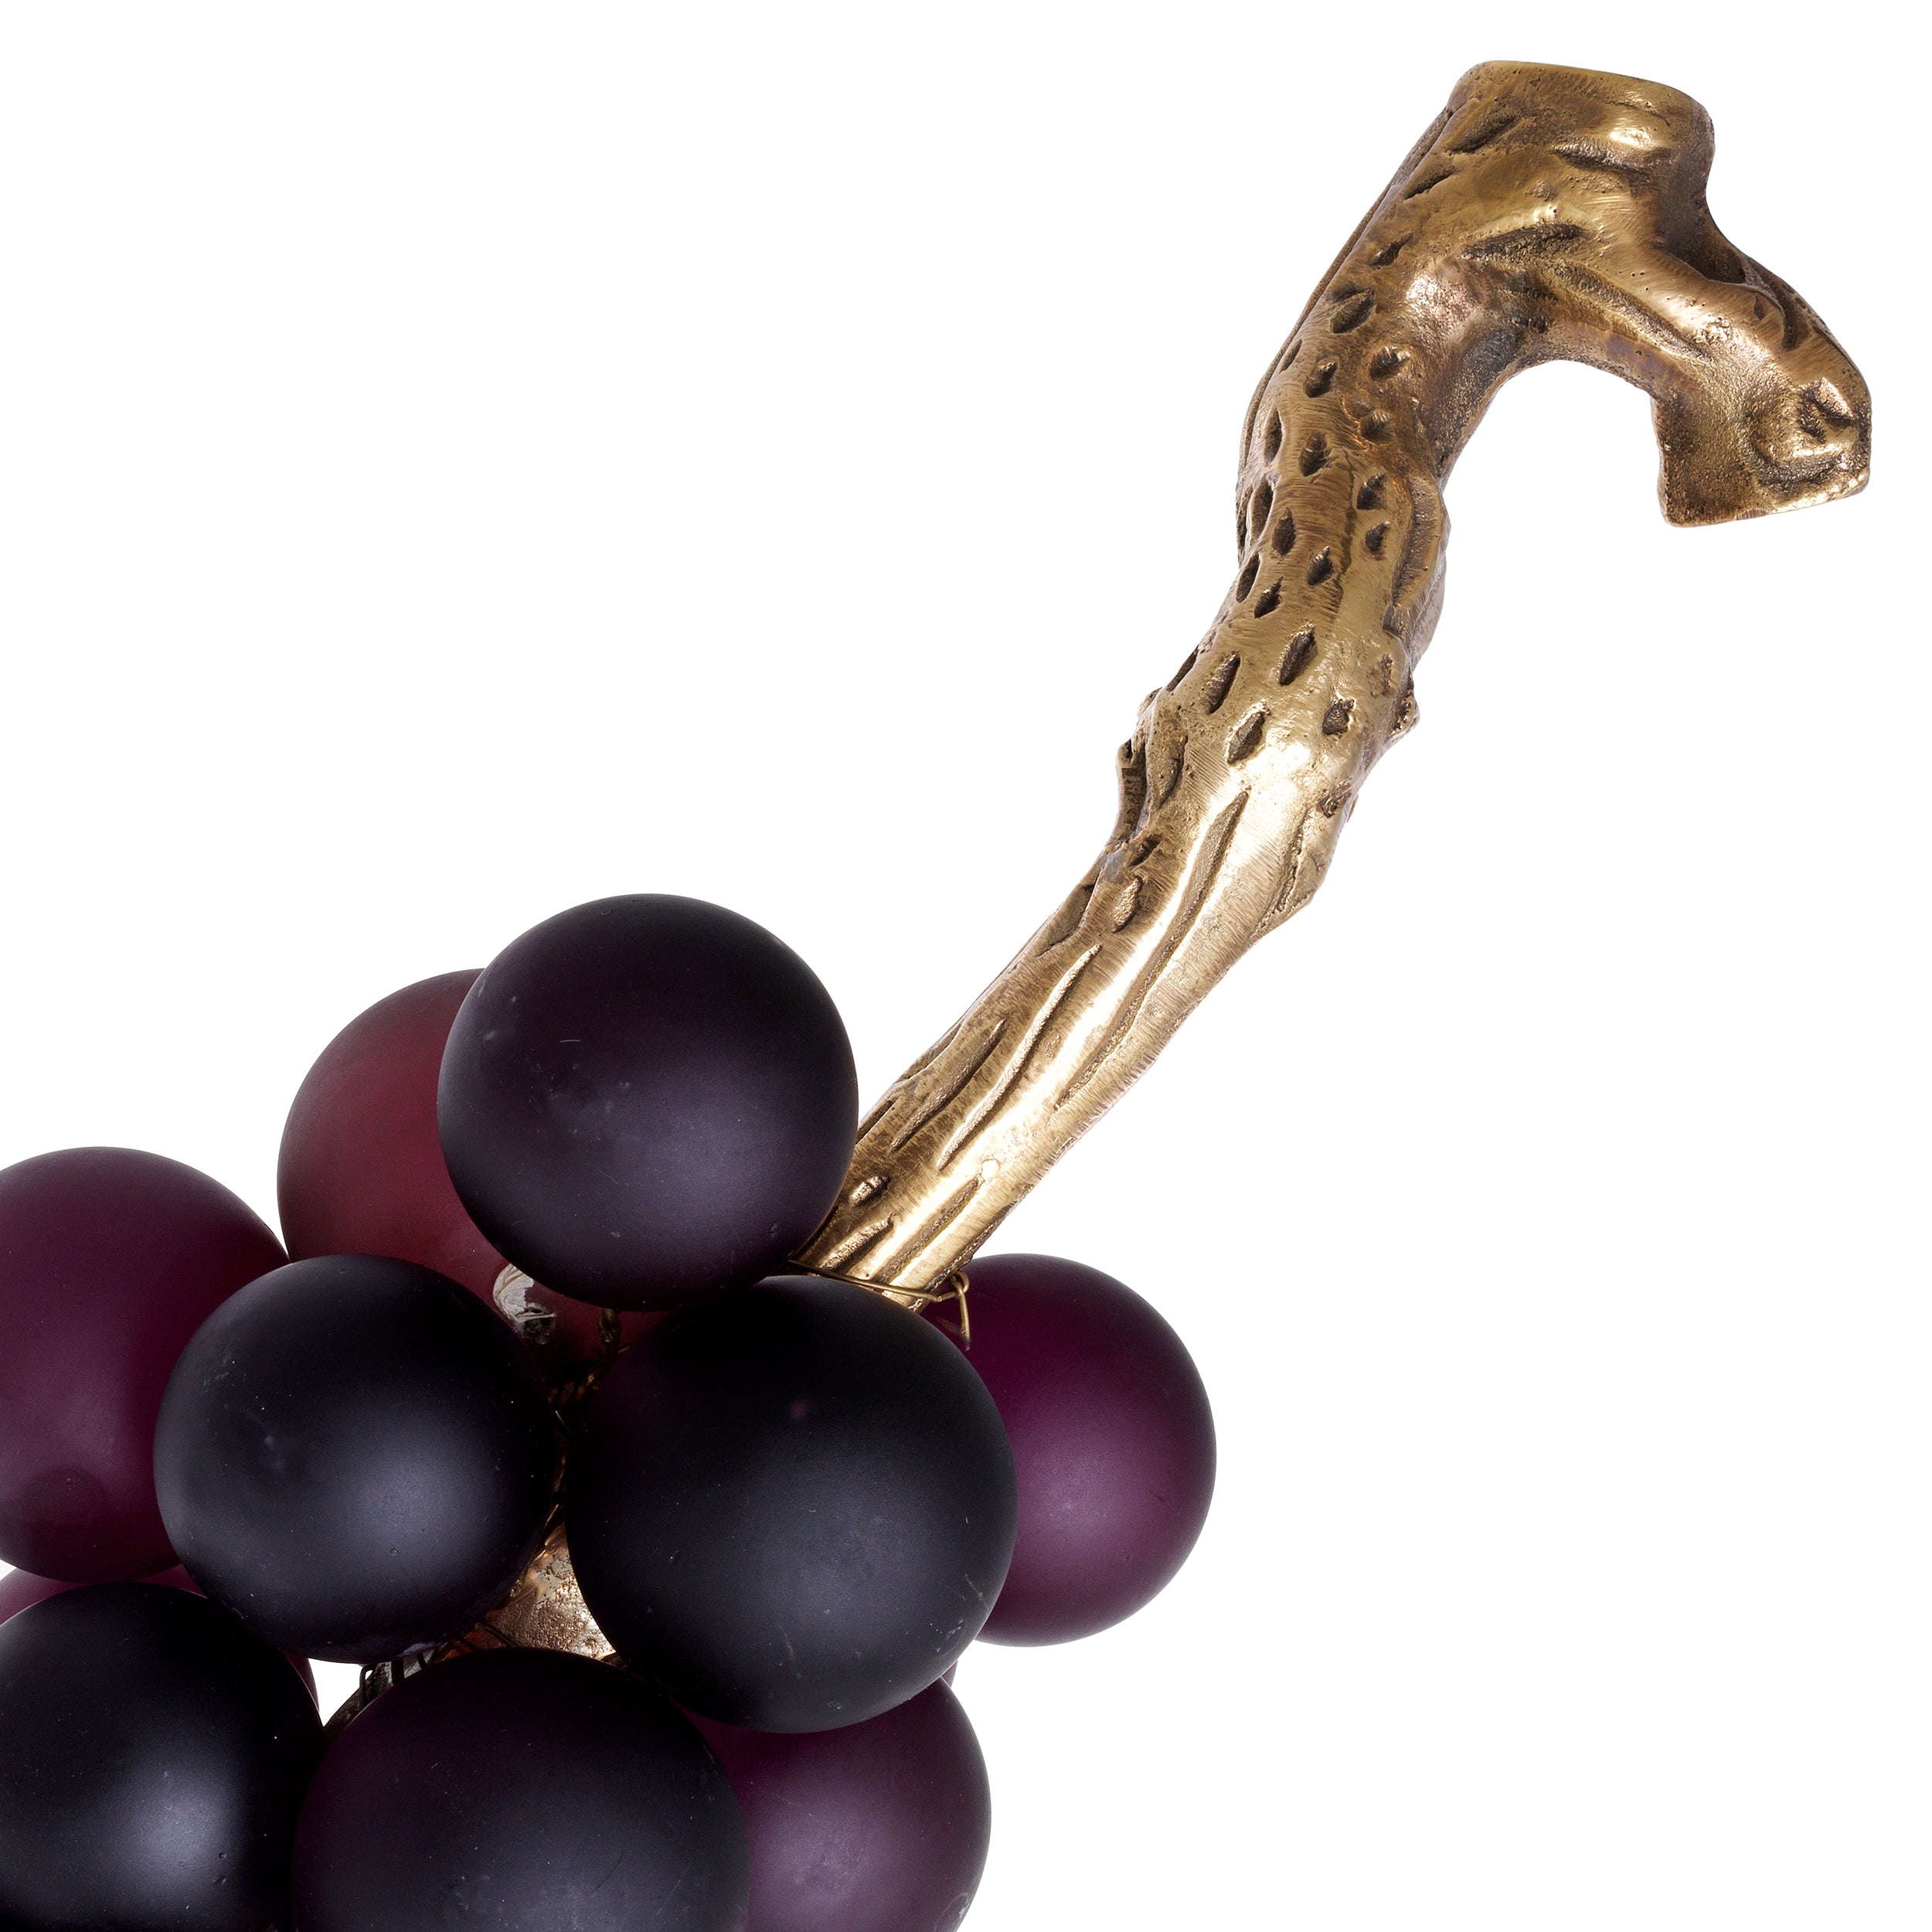 Object French Grapes - Paars